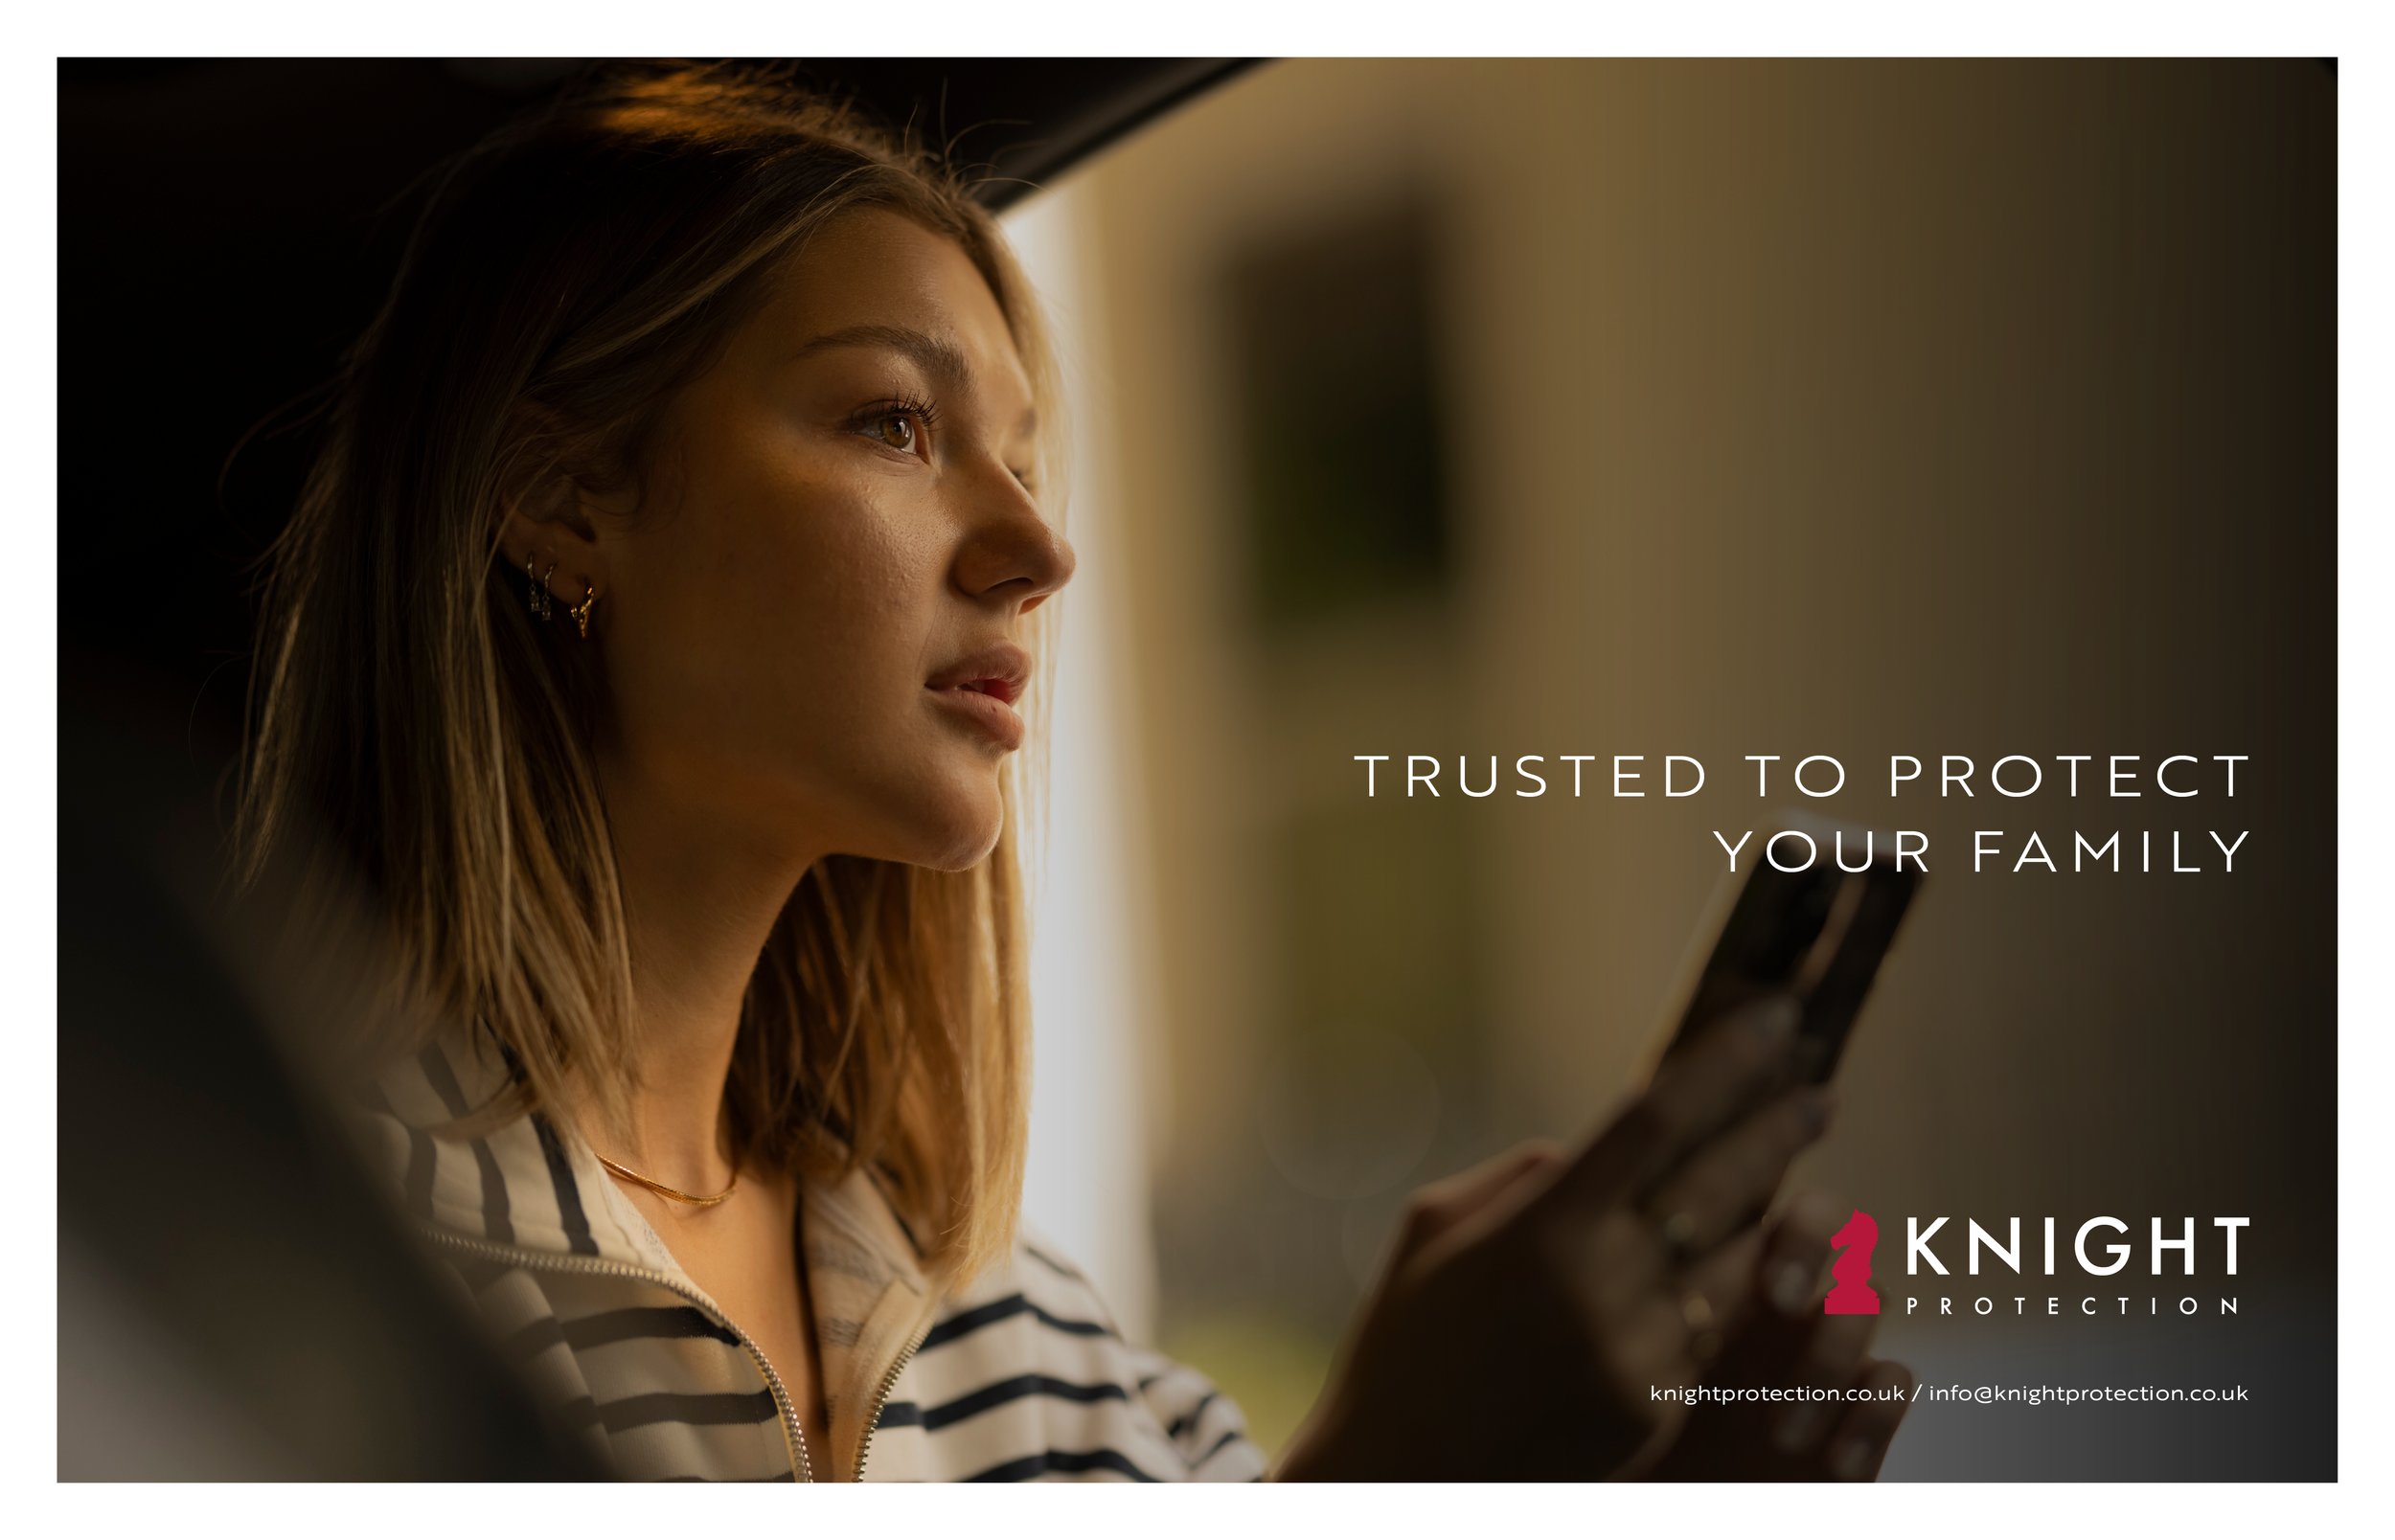 Knight Protection advertising